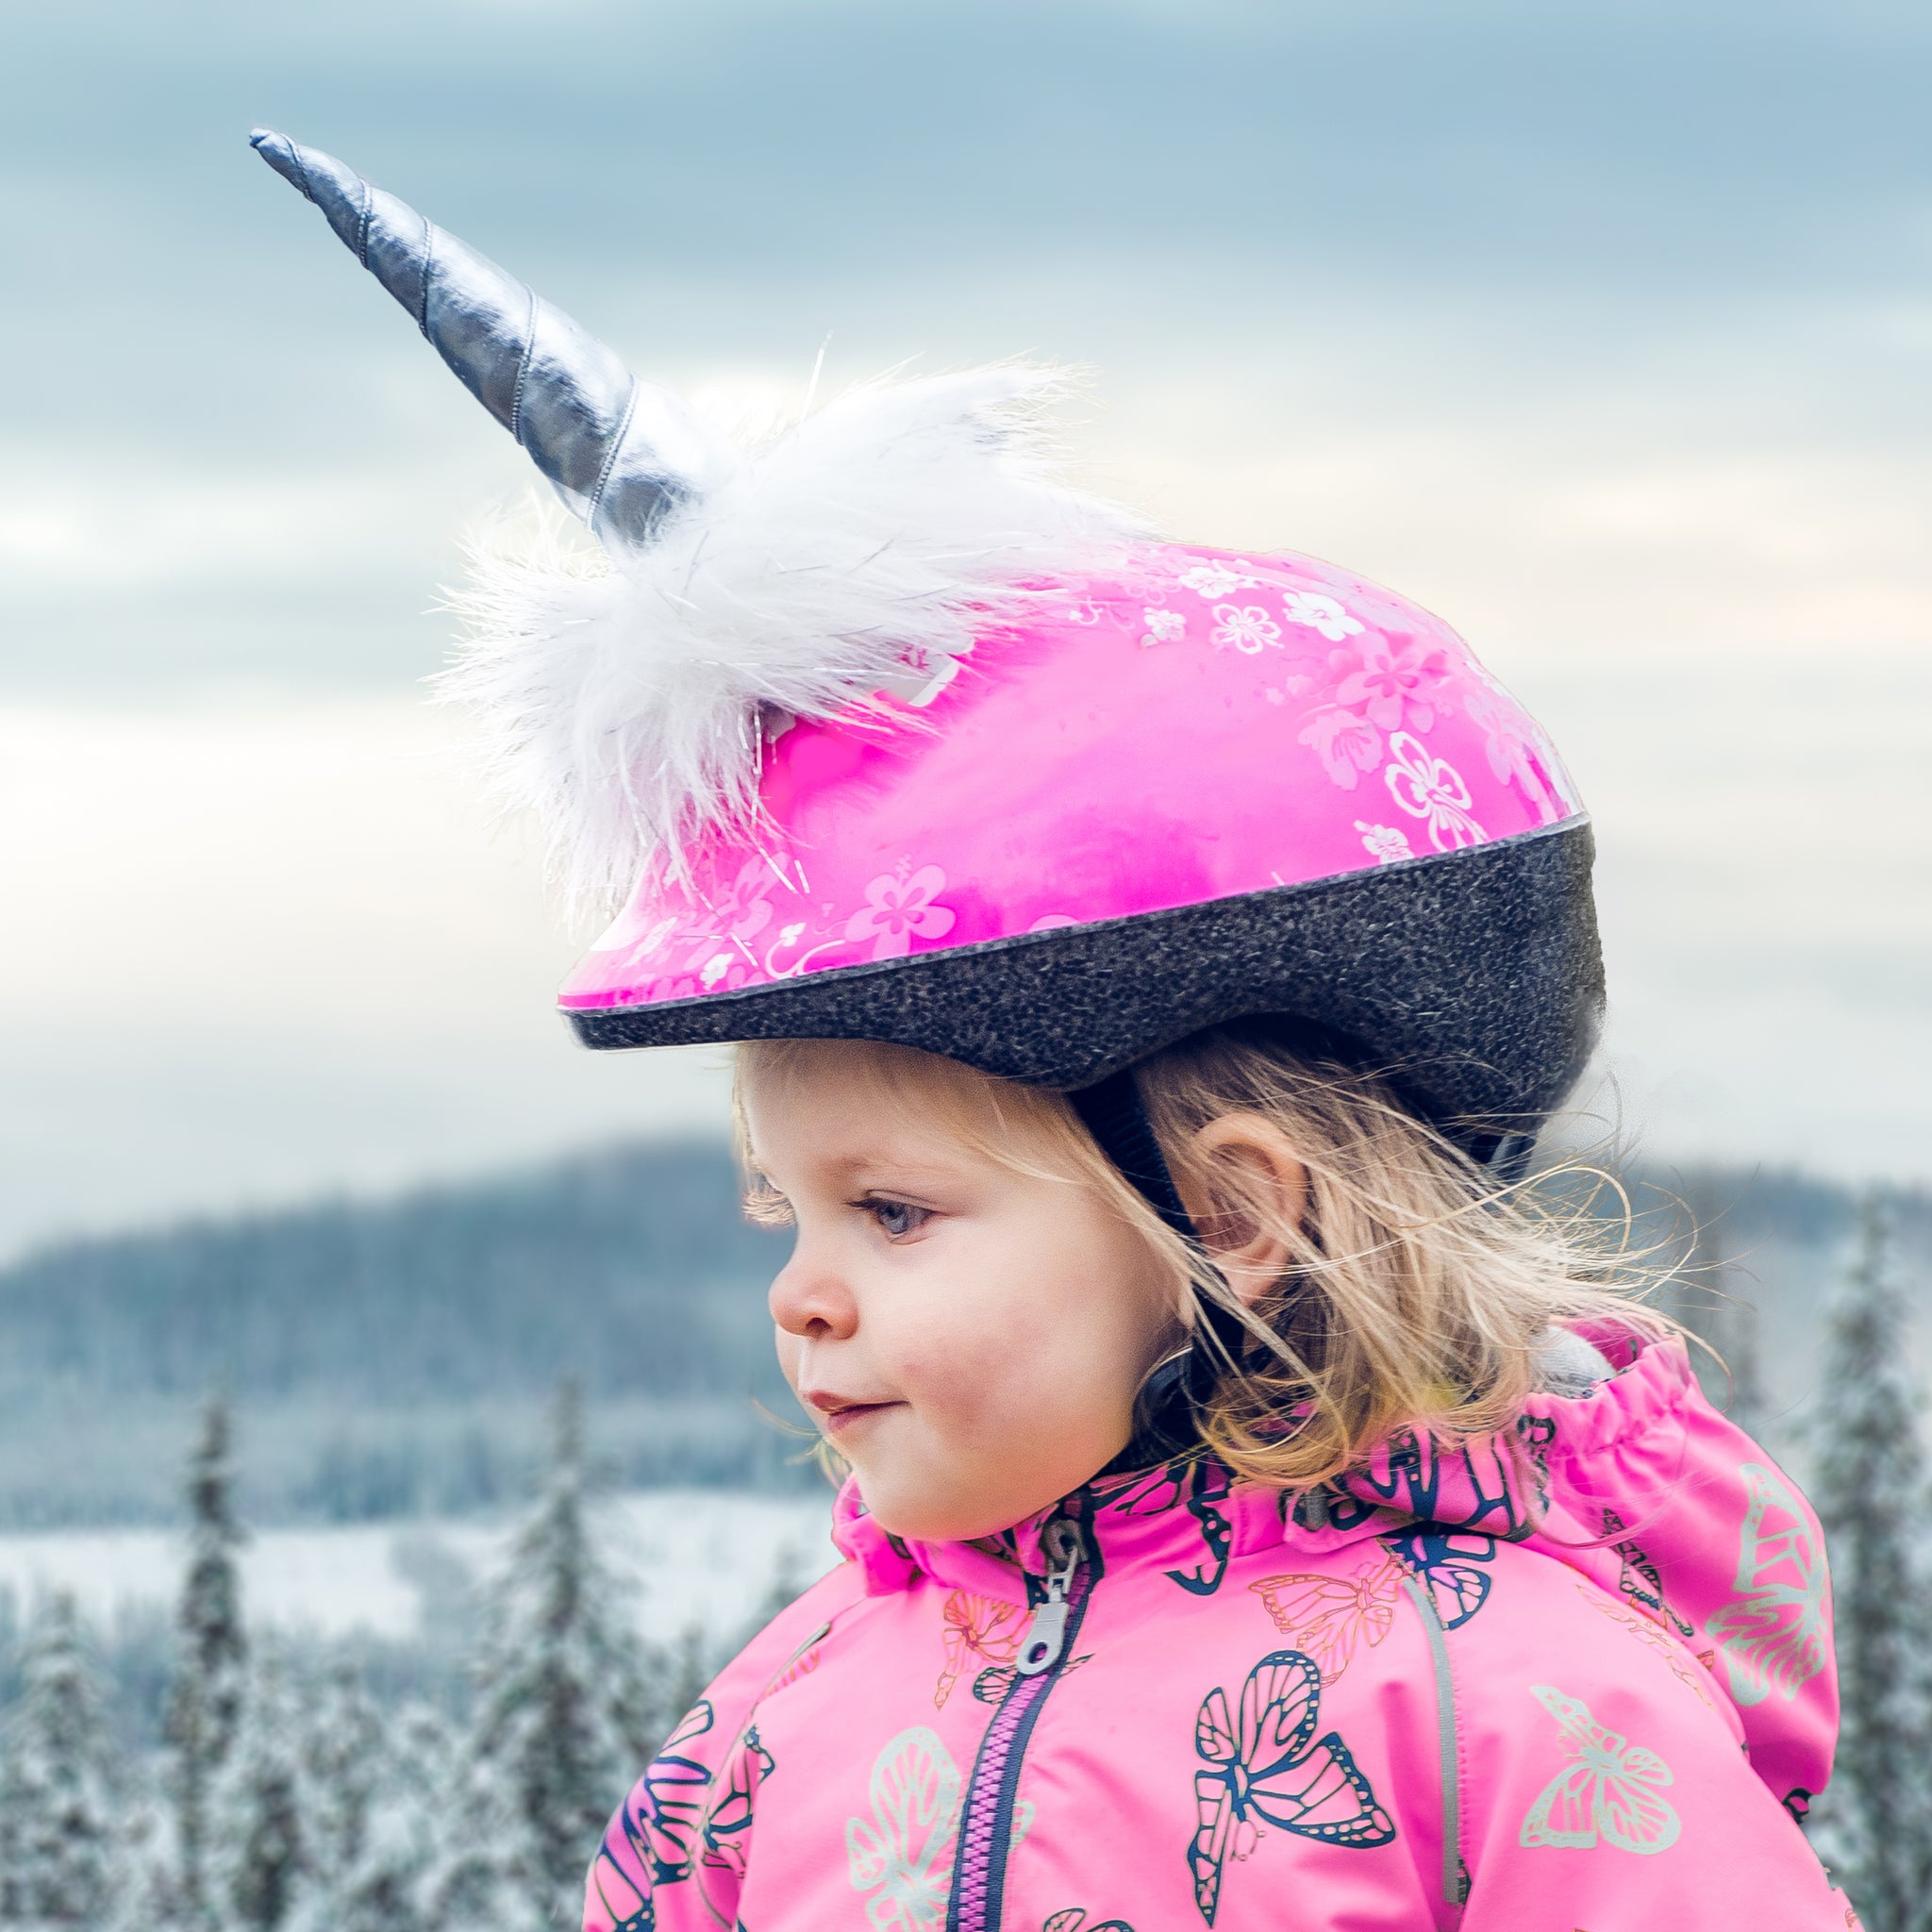 Tuga the Narwhal Helmet Unicorn Accessory in Silver